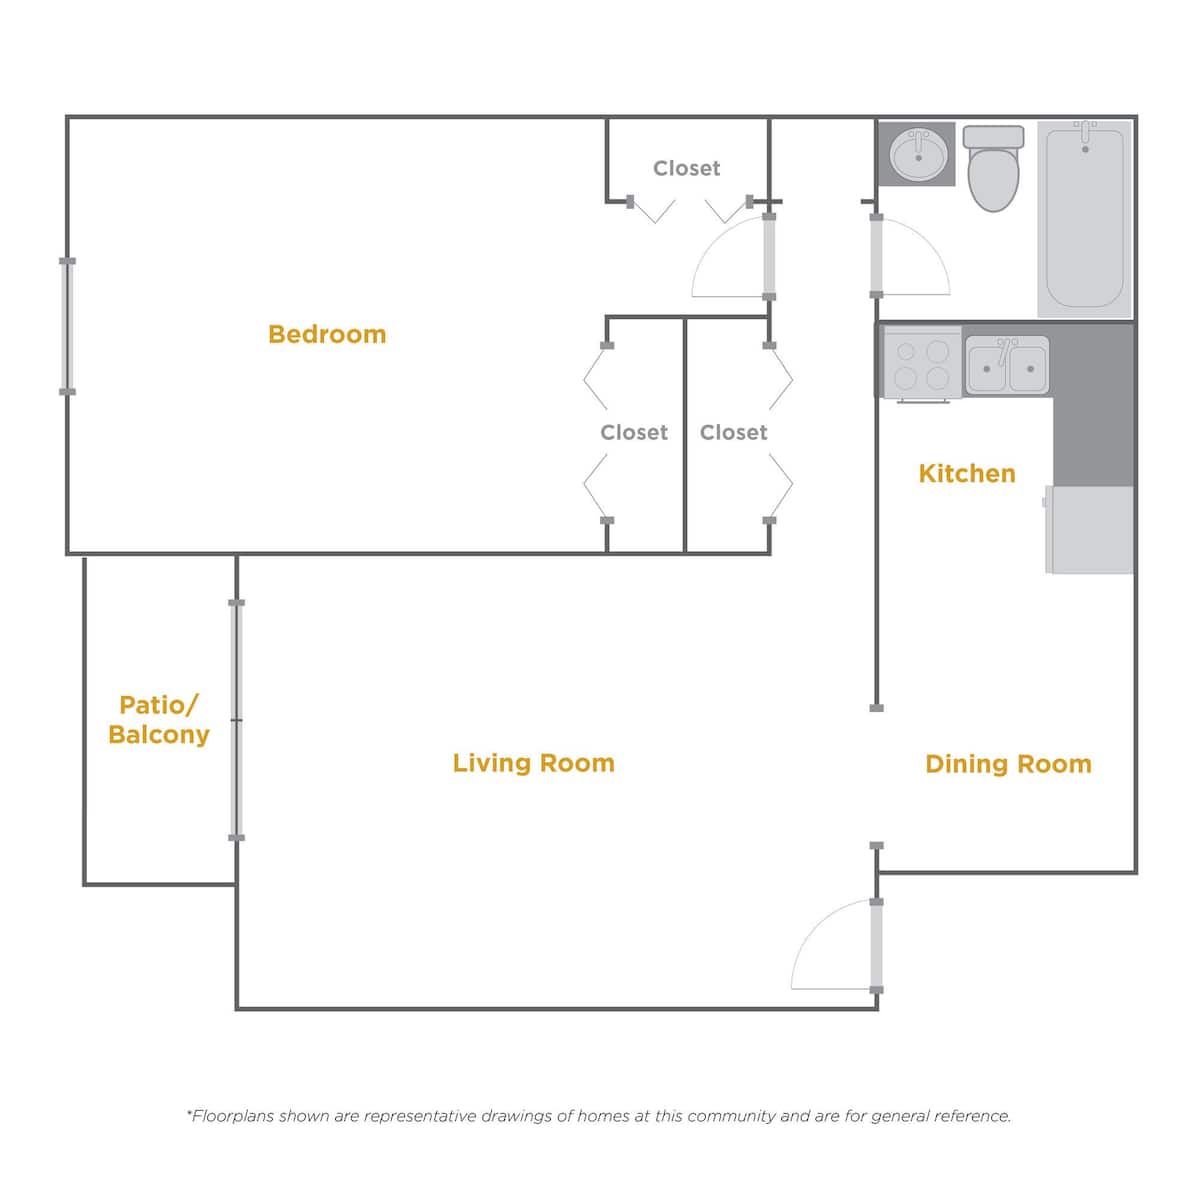 Floorplan diagram for a2_e, showing 1 bedroom